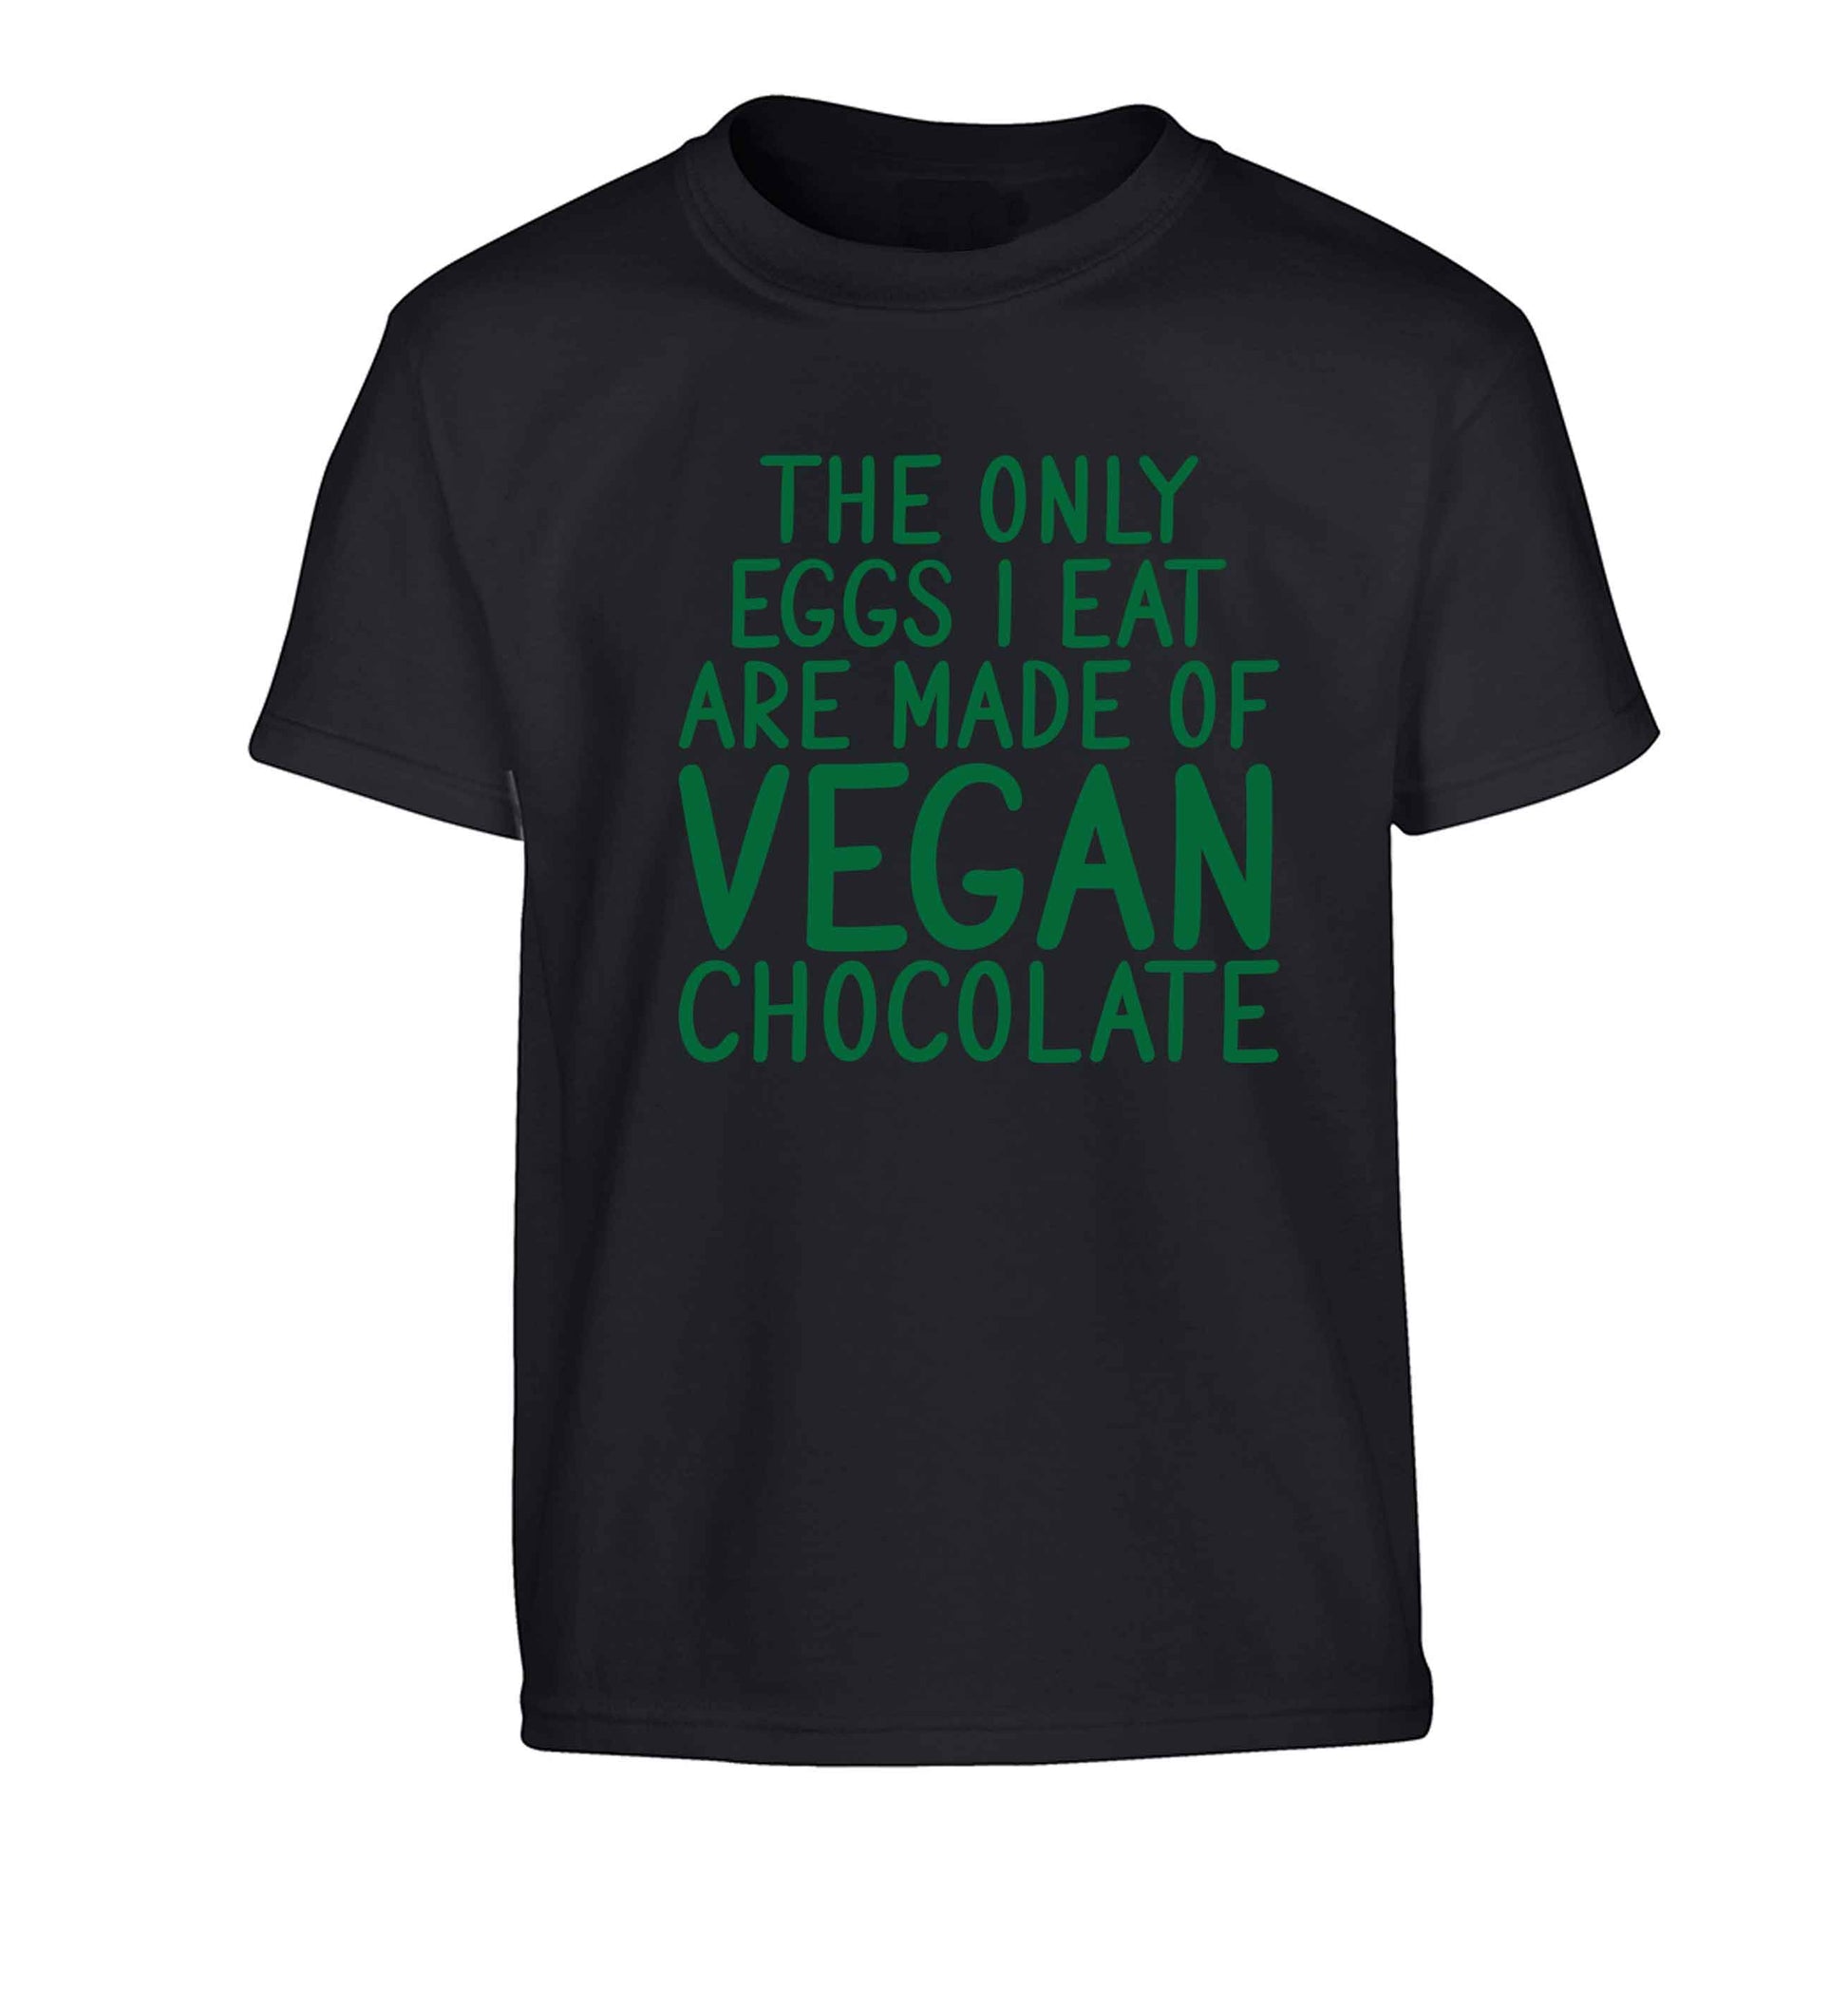 The only eggs I eat are made of vegan chocolate Children's black Tshirt 12-13 Years